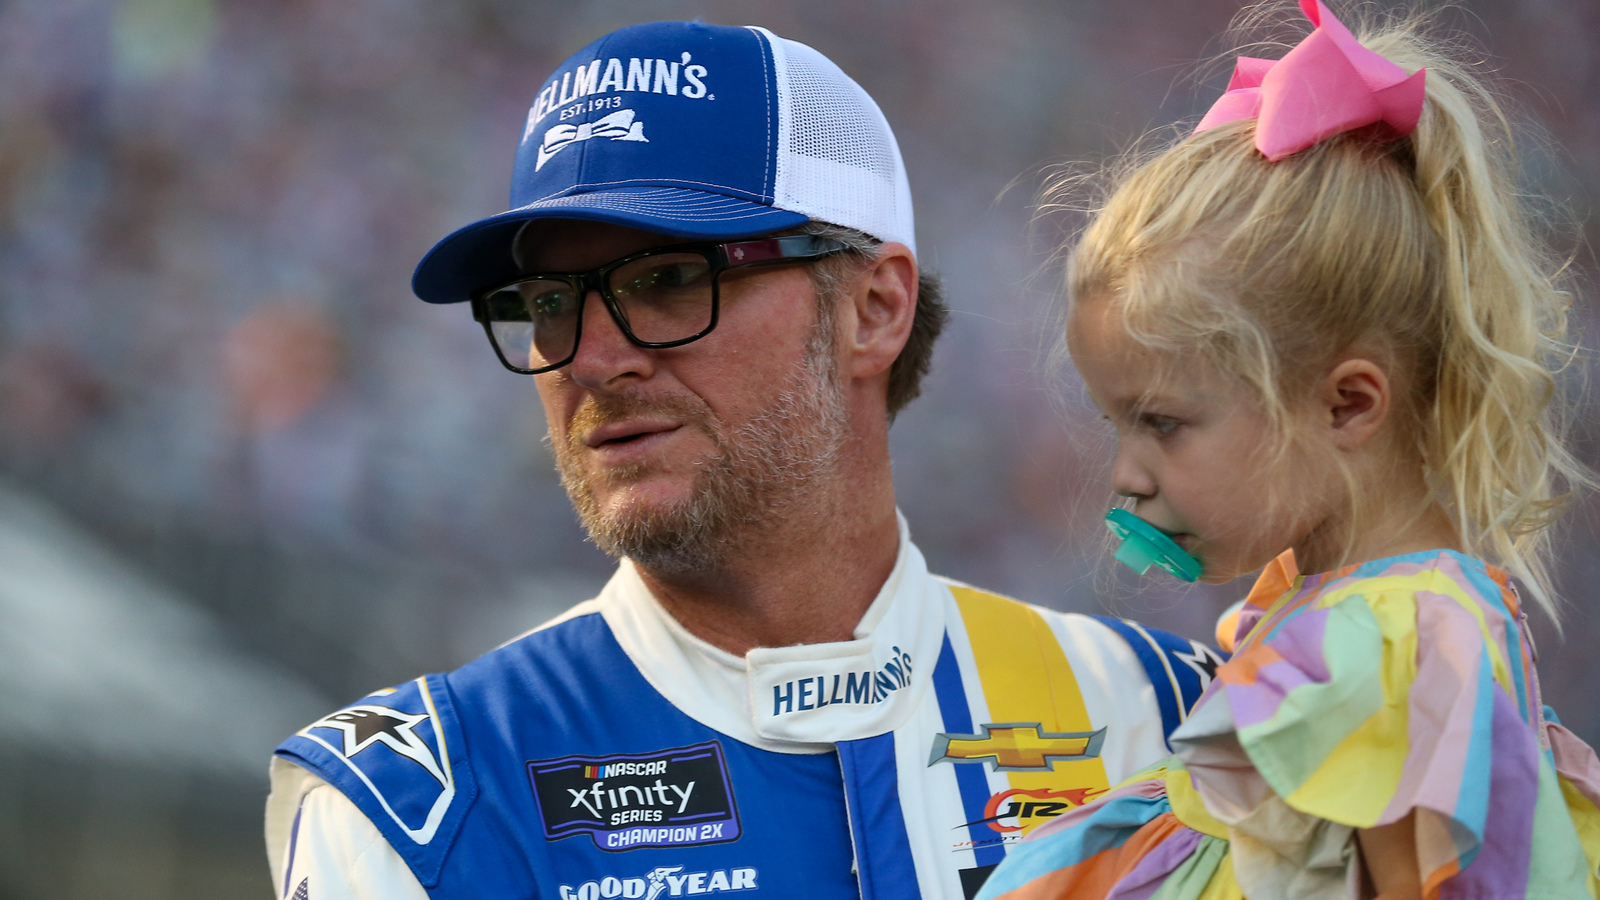 Dale Earnhardt Jr.’s ‘heart is full’ after spending Christmas holiday with family